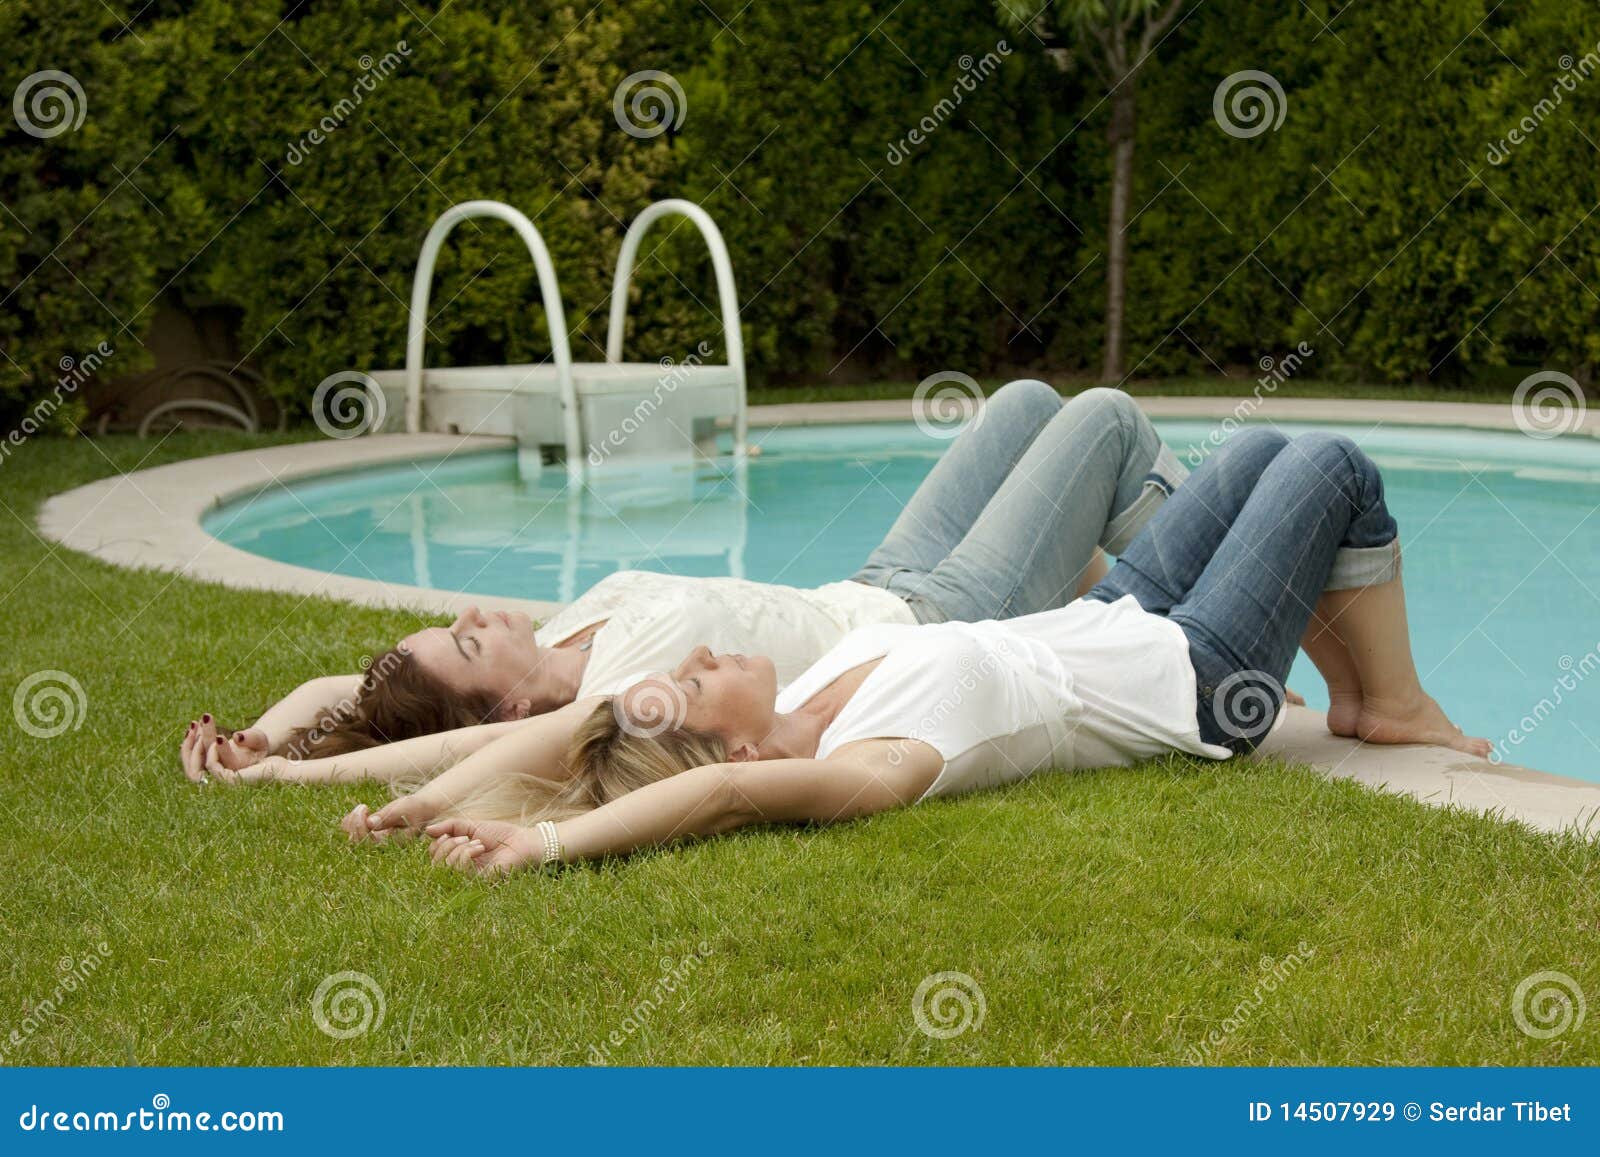 Poolside Beauties Stock Image Image Of Lawn Lying Relax 14507929